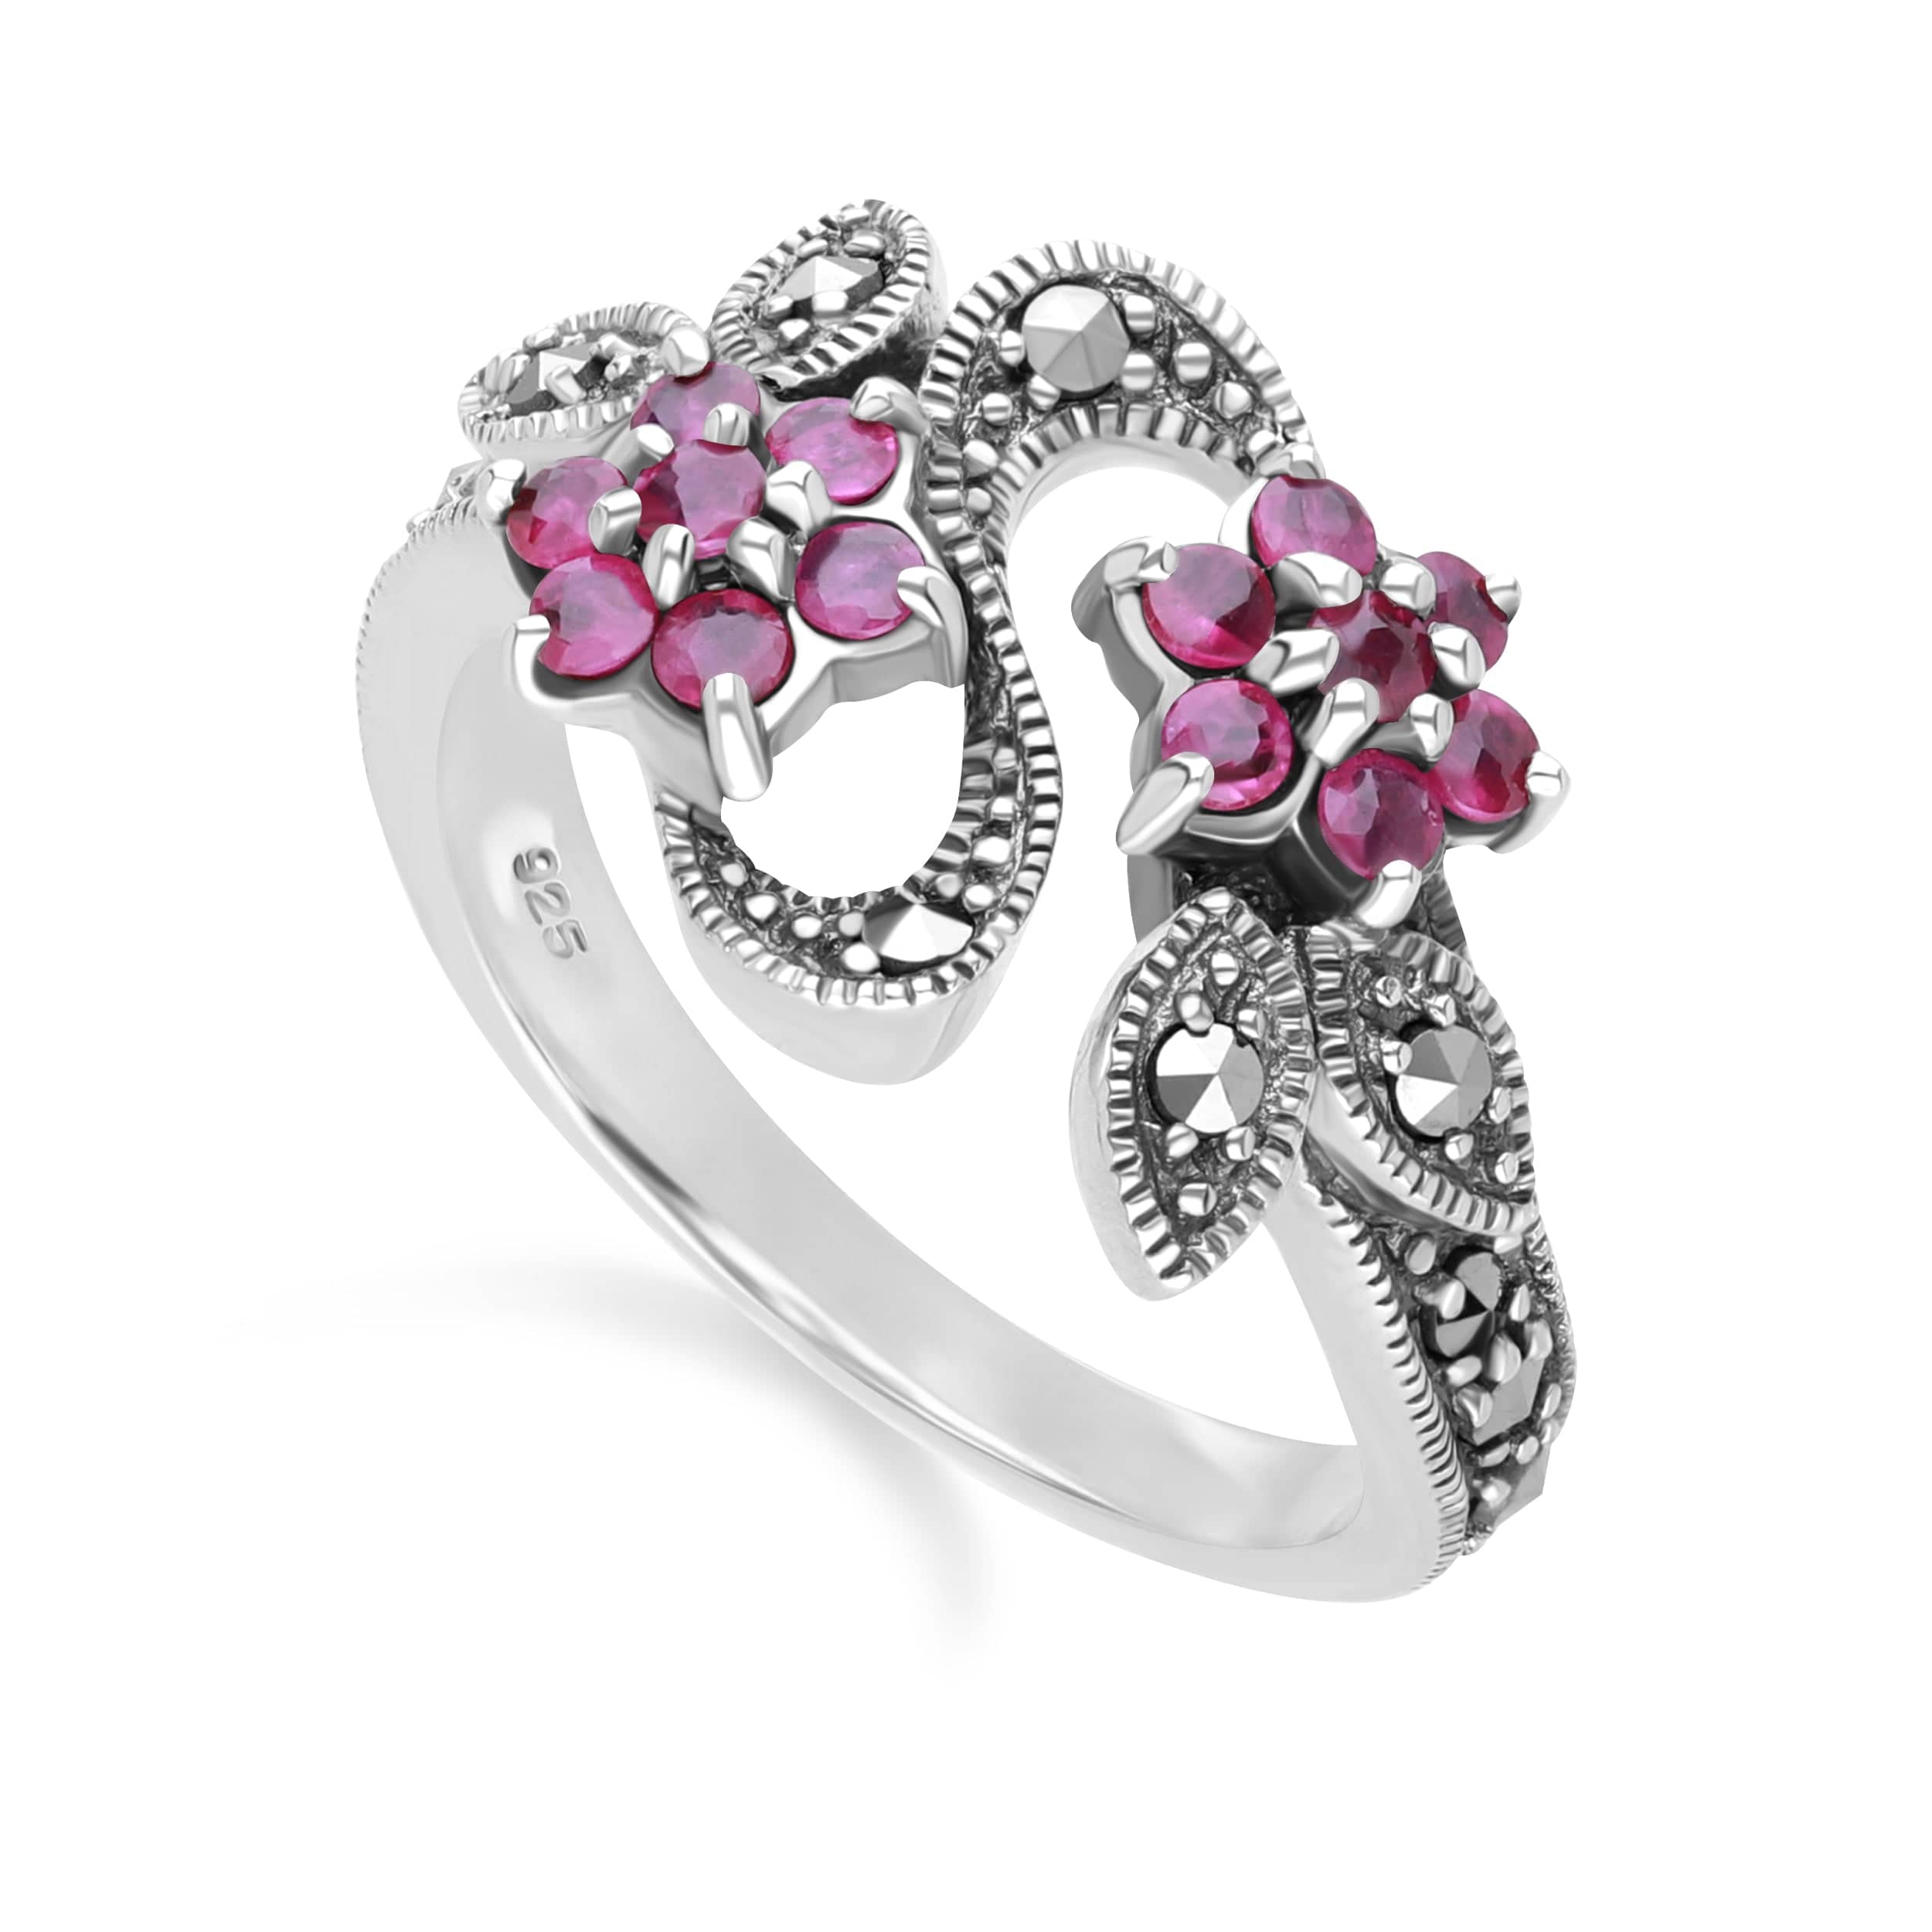 Art Nouveau Style Round Ruby & Marcasite Flower Ring in Sterling Silver